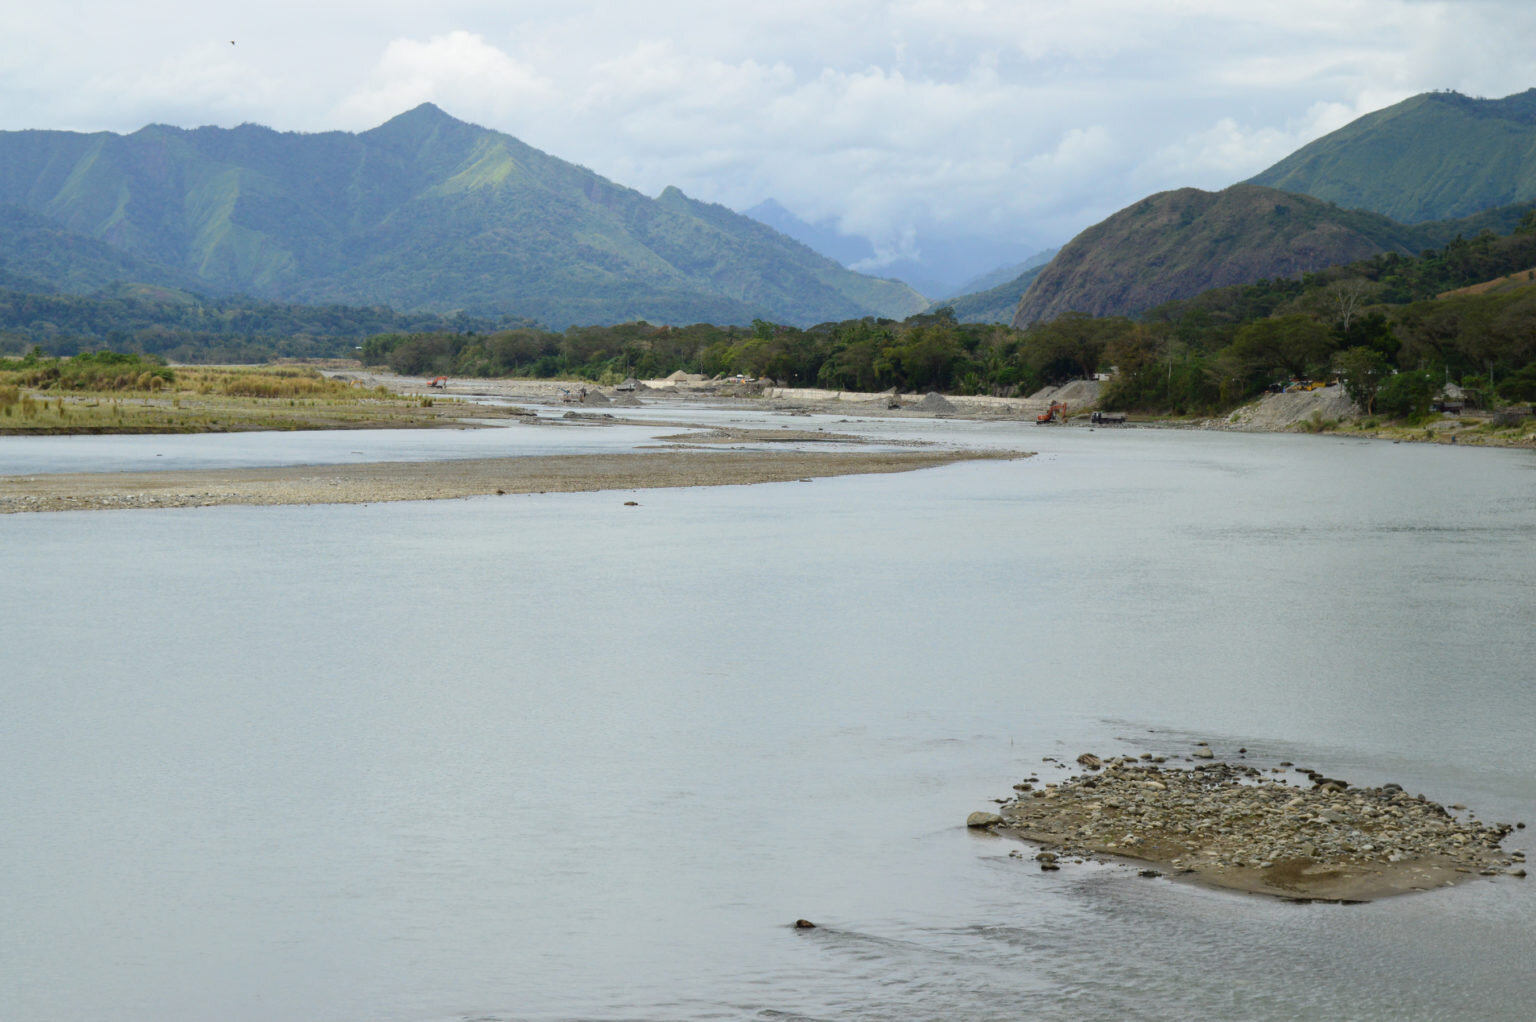 The Chico river pump irrigation system, the first infrastructure project in the Philippines that is funded by a loan from China, is set to irrigate 8,700 hectares of farmlands. Image by Karlston Lapniten for Mongabay